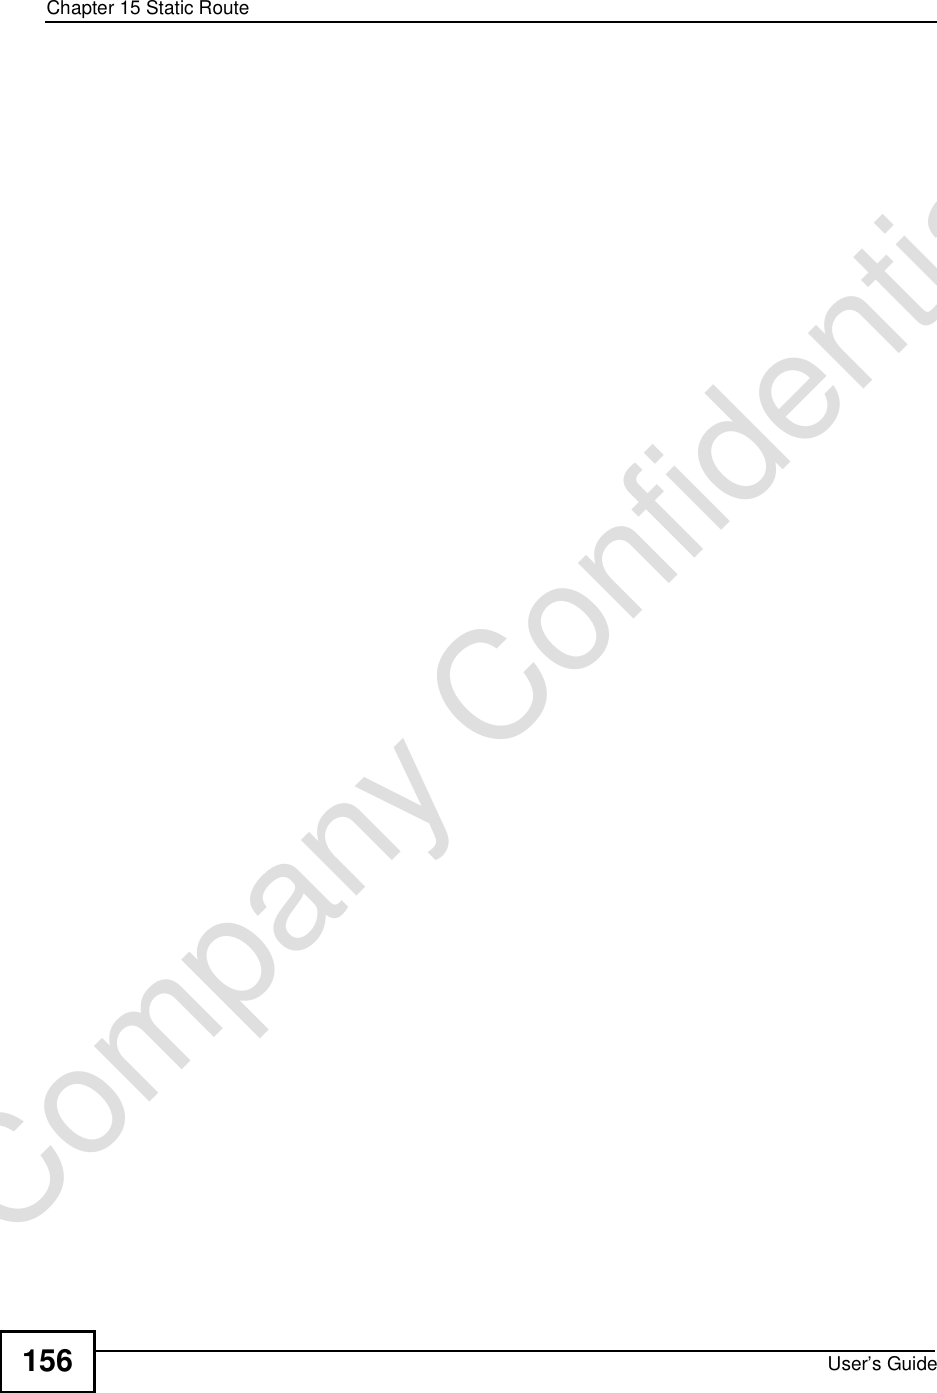 Chapter 15Static RouteUser’s Guide156Company Confidential